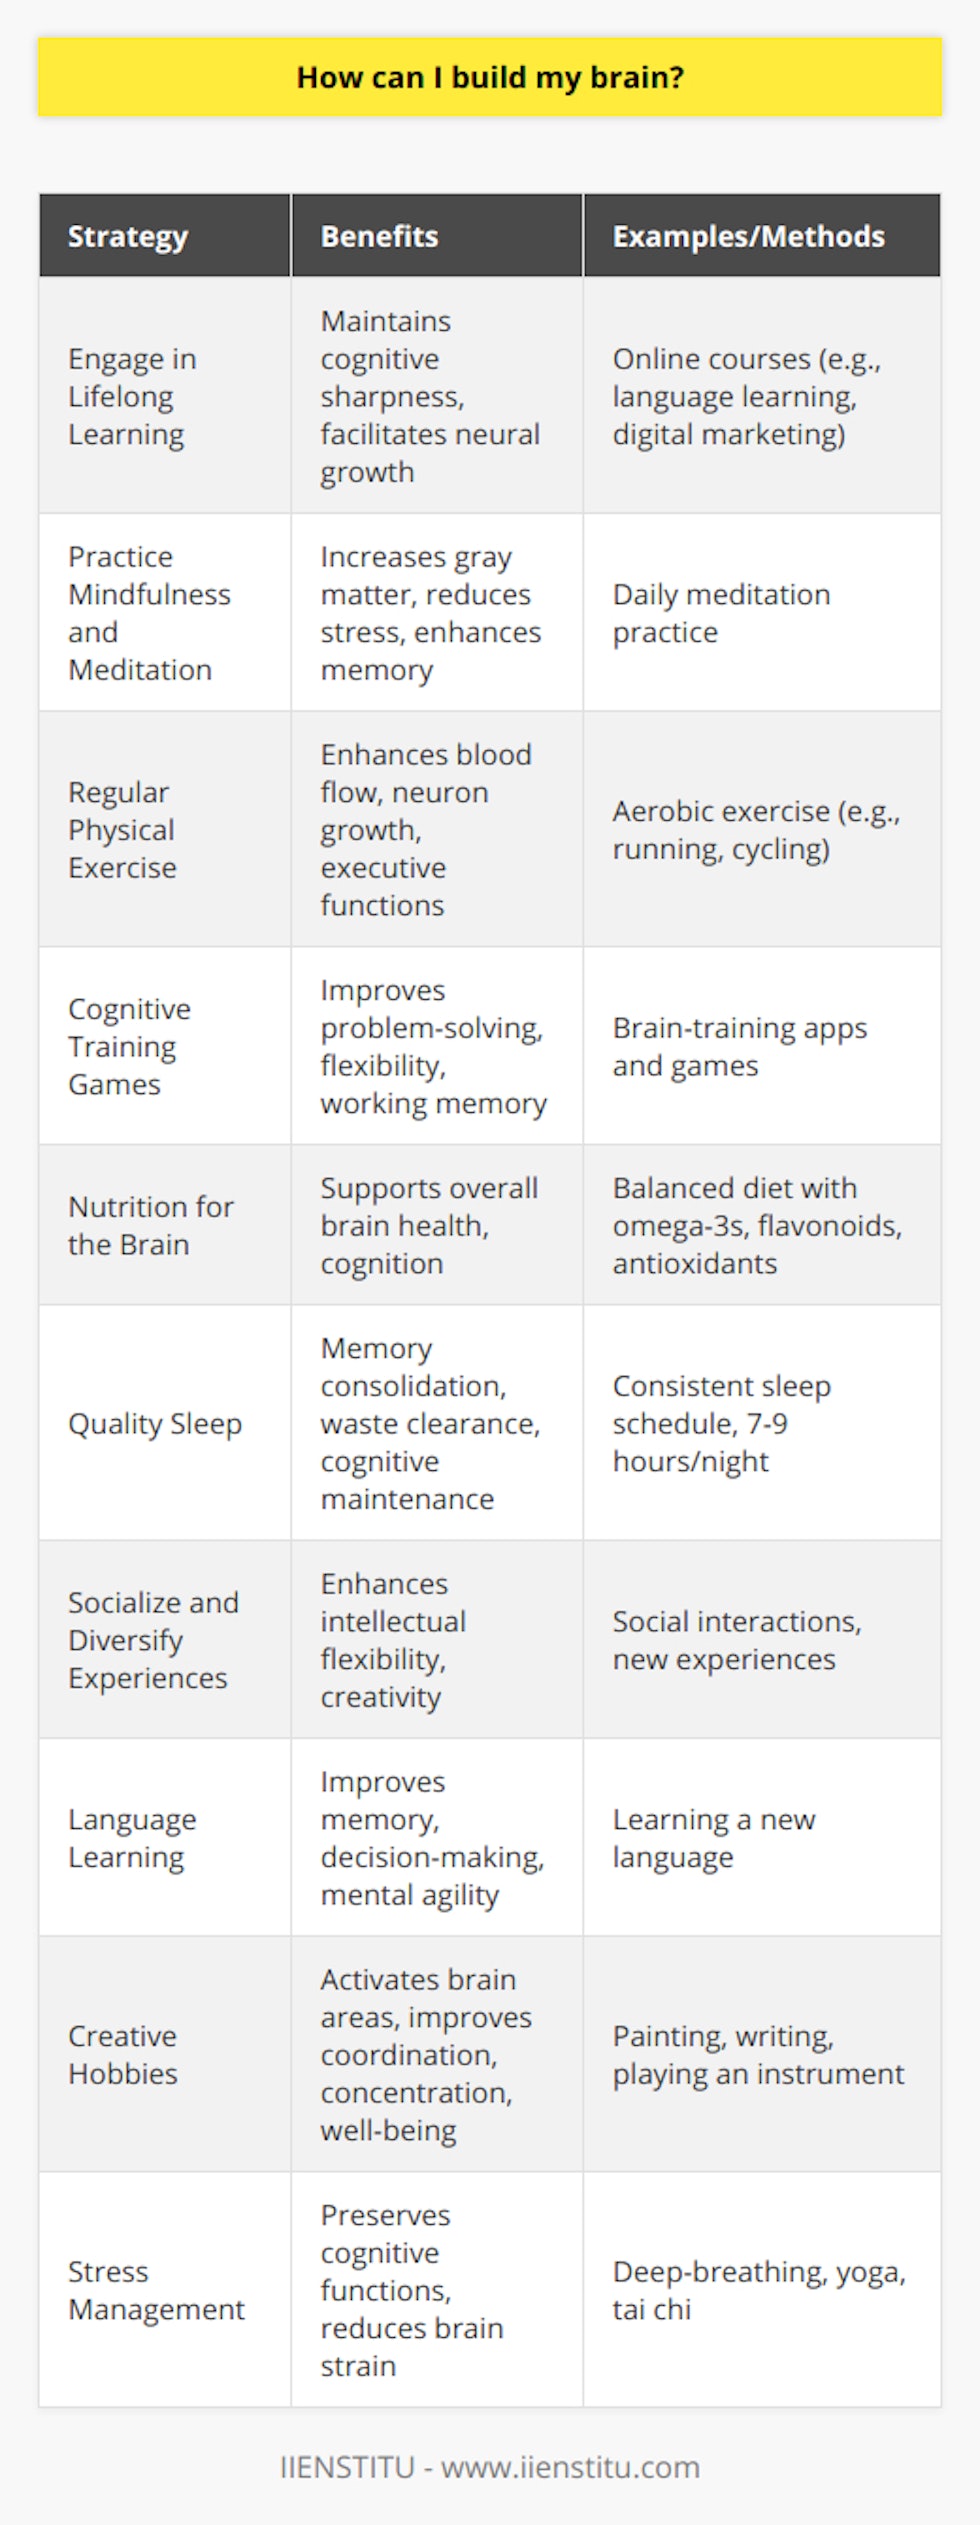 Building your brain is not just about acquiring knowledge, but also about enhancing cognitive functions, memory, and creativity. It's a lifelong process that can be rewarding both personally and professionally. Here are several effective strategies to stimulate your mind and strengthen your mental faculties:1. **Engage in Lifelong Learning**: Continuous education is crucial for keeping your brain sharp. Consider enrolling in online courses that challenge you and expand your knowledge base. For instance, platforms such as IIENSTITU offer a wide array of courses on subjects ranging from language learning to digital marketing, which can stimulate different areas of the brain and facilitate neural growth.2. **Practice Mindfulness and Meditation**: Daily meditation has been shown to change the brain's structure and function. It can increase gray matter density, which is associated with learning and memory, and reduce stress levels, which can negatively impact cognition.3. **Regular Physical Exercise**: Physical activity increases blood flow to the brain and stimulates the growth of new neurons. Aerobic exercise, in particular, has been associated with improved executive function, attention, and memory.4. **Cognitive Training Games**: Brain-training apps and games can provide targeted cognitive exercises to improve areas such as problem-solving, flexibility, and working memory. However, it's important to approach these with a critical eye, as some may offer greater benefits than others.5. **Nutrition for the Brain**: Consuming brain-healthy foods is fundamental. Omega-3 fatty acids found in fish, flavonoids in berries, and antioxidants in leafy greens can support brain health. Also, staying hydrated is essential as the brain is around 73% water.6. **Quality Sleep**: During sleep, your brain consolidates memories and clears out waste. A chronic lack of sleep can impair reasoning, problem-solving, and attention to detail. Thus, maintaining a consistent sleep schedule is crucial for cognitive function.7. **Socialize and Diversify Your Experiences**: Social interactions and exposure to new experiences stimulate the brain. Engaging conversations and activities can enhance your intellectual flexibility and creativity.8. **Language Learning**: Picking up a new language is an excellent way to challenge your cognitive processes and may also improve memory and decision-making skills. It engages different language centers in the brain, thereby increasing mental agility.9. **Creative Hobbies**: Activities like painting, writing, or playing an instrument activate various brain areas and can enhance coordination, concentration, and emotional well-being.10. **Stress Management**: Chronic stress takes a toll on the brain, hindering cognitive functions. Techniques like deep-breathing exercises, yoga, or tai chi can help manage stress levels and protect your brain health.Remember that your brain is malleable, a concept known as neuroplasticity. By consistently challenging yourself with new knowledge and experiences, you are encouraging your brain to grow and strengthen its networks. Simply put, the more you train your brain with a combination of healthy habits, learning, and exercises, the stronger and more efficient it can become. Keep in mind that real improvements come with dedication and regular practice, so be patient and persistent in your efforts to build a more powerful brain.